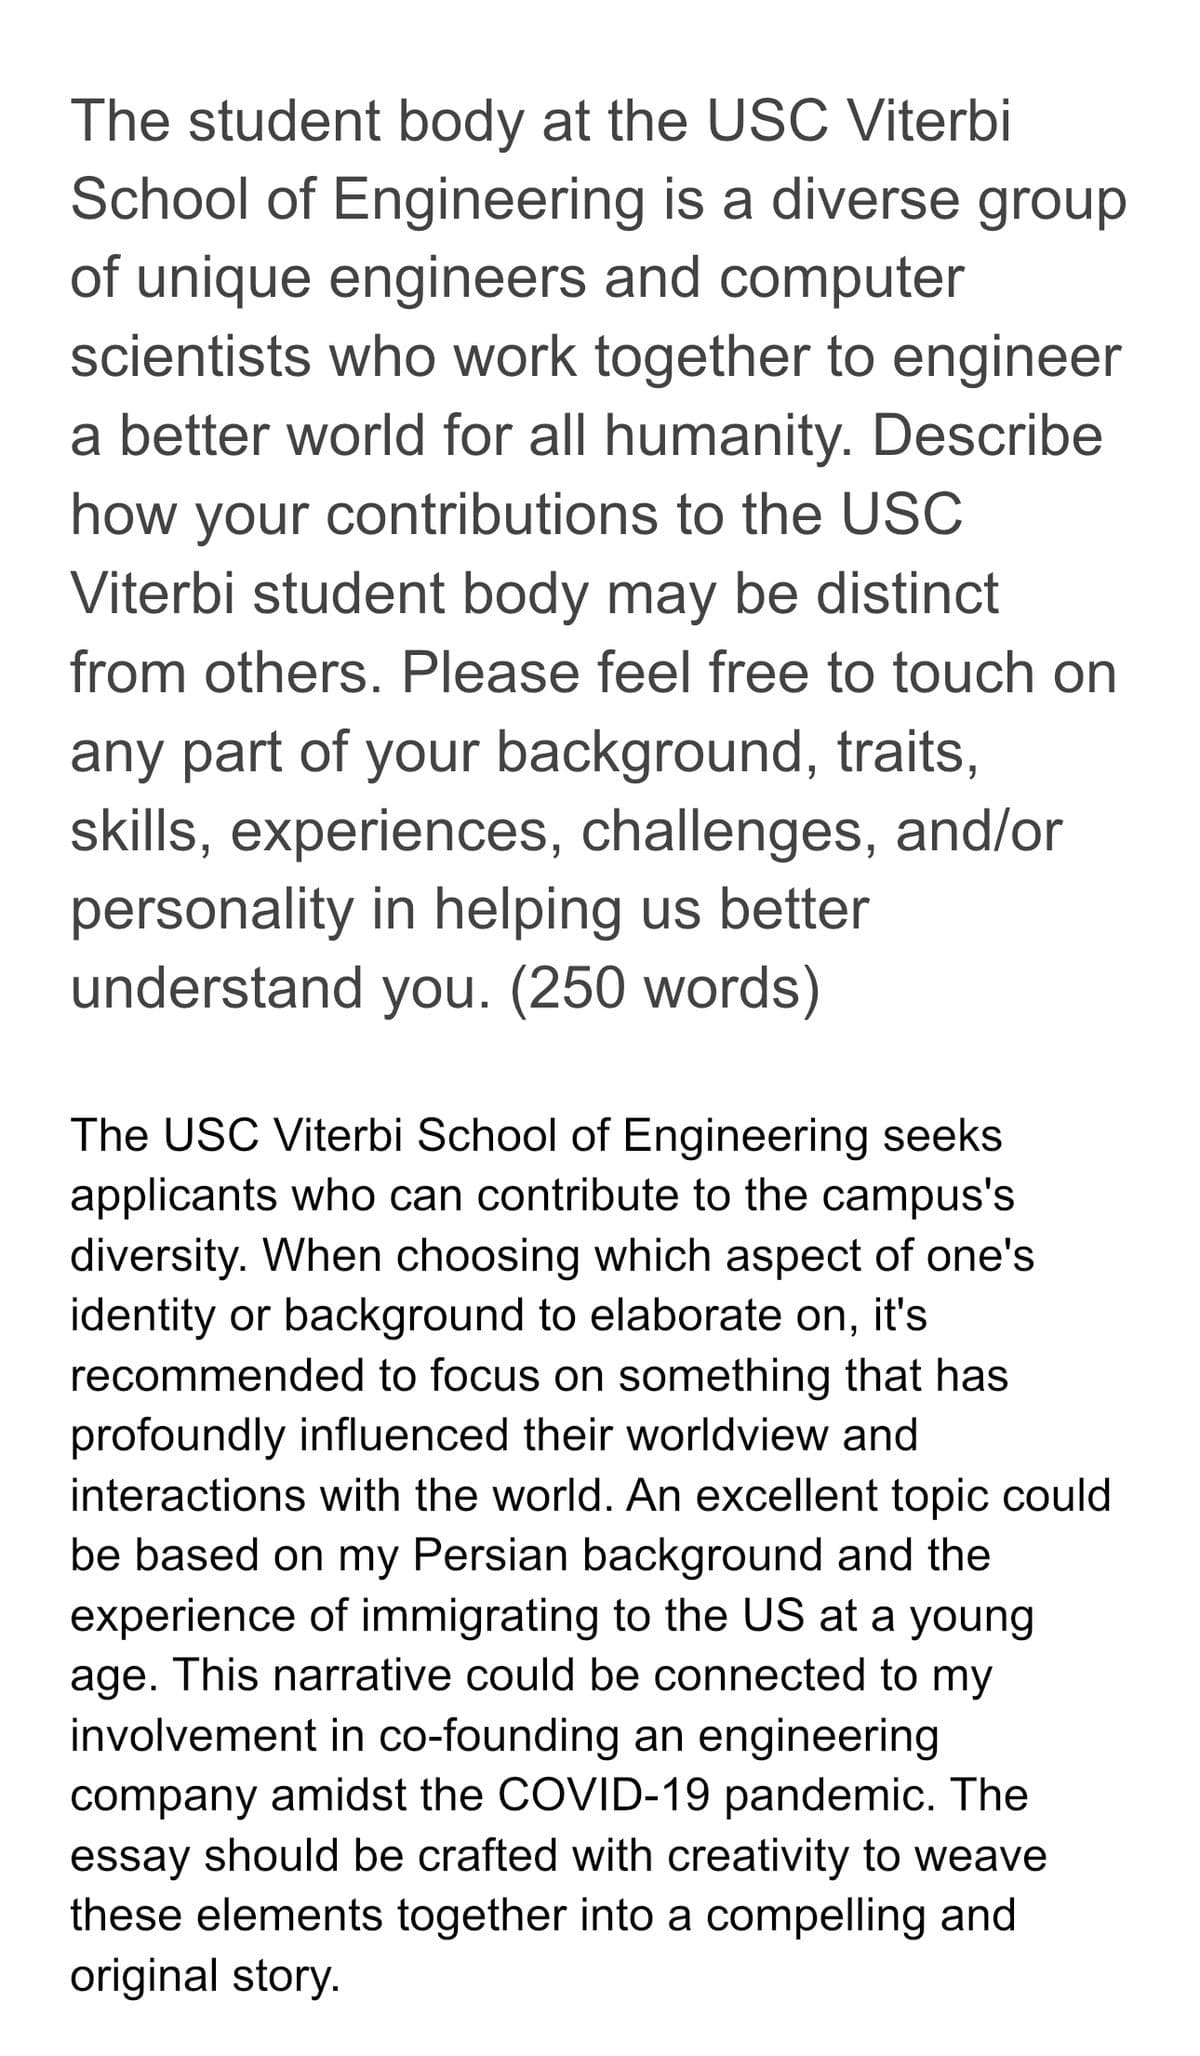 The student body at the USC Viterbi
School of Engineering is a diverse group
of unique engineers and computer
scientists who work together to engineer
a better world for all humanity. Describe
how your contributions to the USC
Viterbi student body may be distinct
from others. Please feel free to touch on
any part of your background, traits,
skills, experiences, challenges, and/or
personality in helping us better
understand you. (250 words)
The USC Viterbi School of Engineering seeks
applicants who can contribute to the campus's
diversity. When choosing which aspect of one's
identity or background to elaborate on, it's
recommended to focus on something that has
profoundly influenced their worldview and
interactions with the world. An excellent topic could
be based on my Persian background and the
experience of immigrating to the US at a young
age. This narrative could be connected to my
involvement in co-founding an engineering
company amidst the COVID-19 pandemic. The
essay should be crafted with creativity to weave
these elements together into a compelling and
original story.